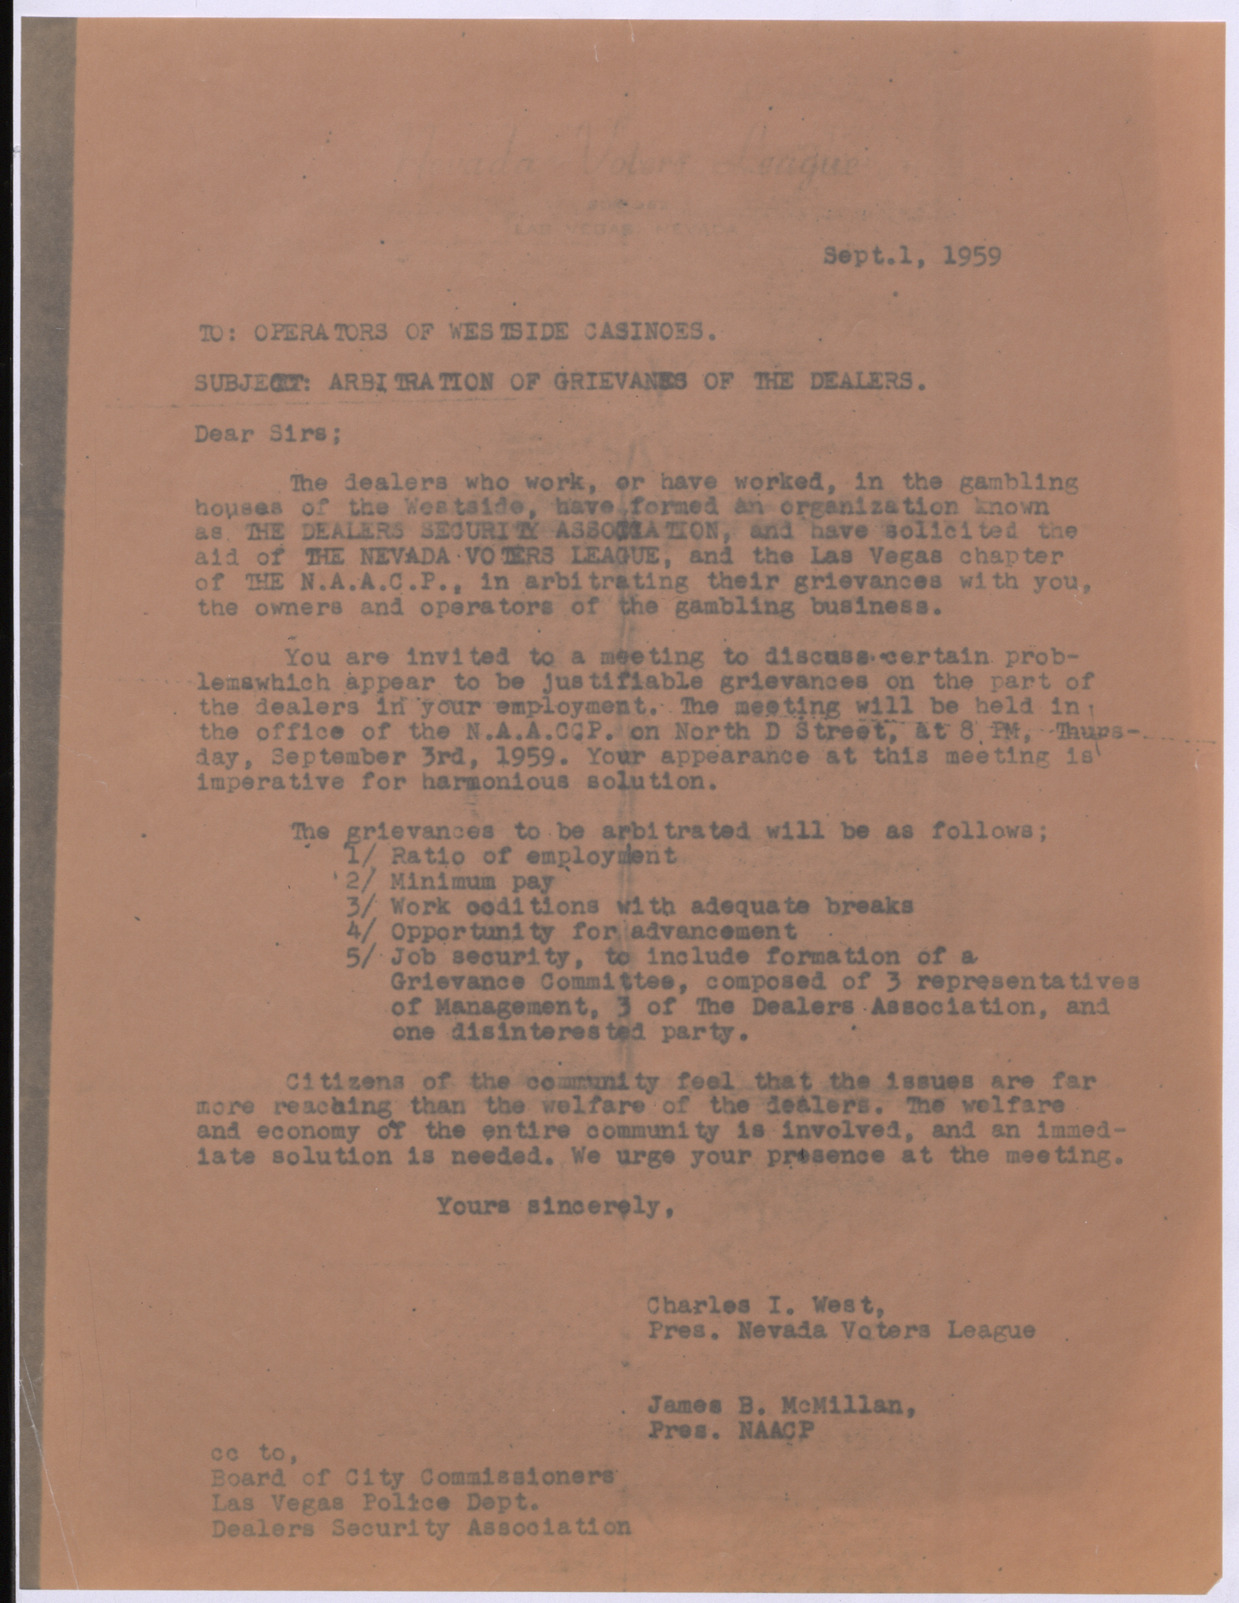 Letter to operators of Westside casinos from Charles I. West and James B. McMillan, September 1, 1959